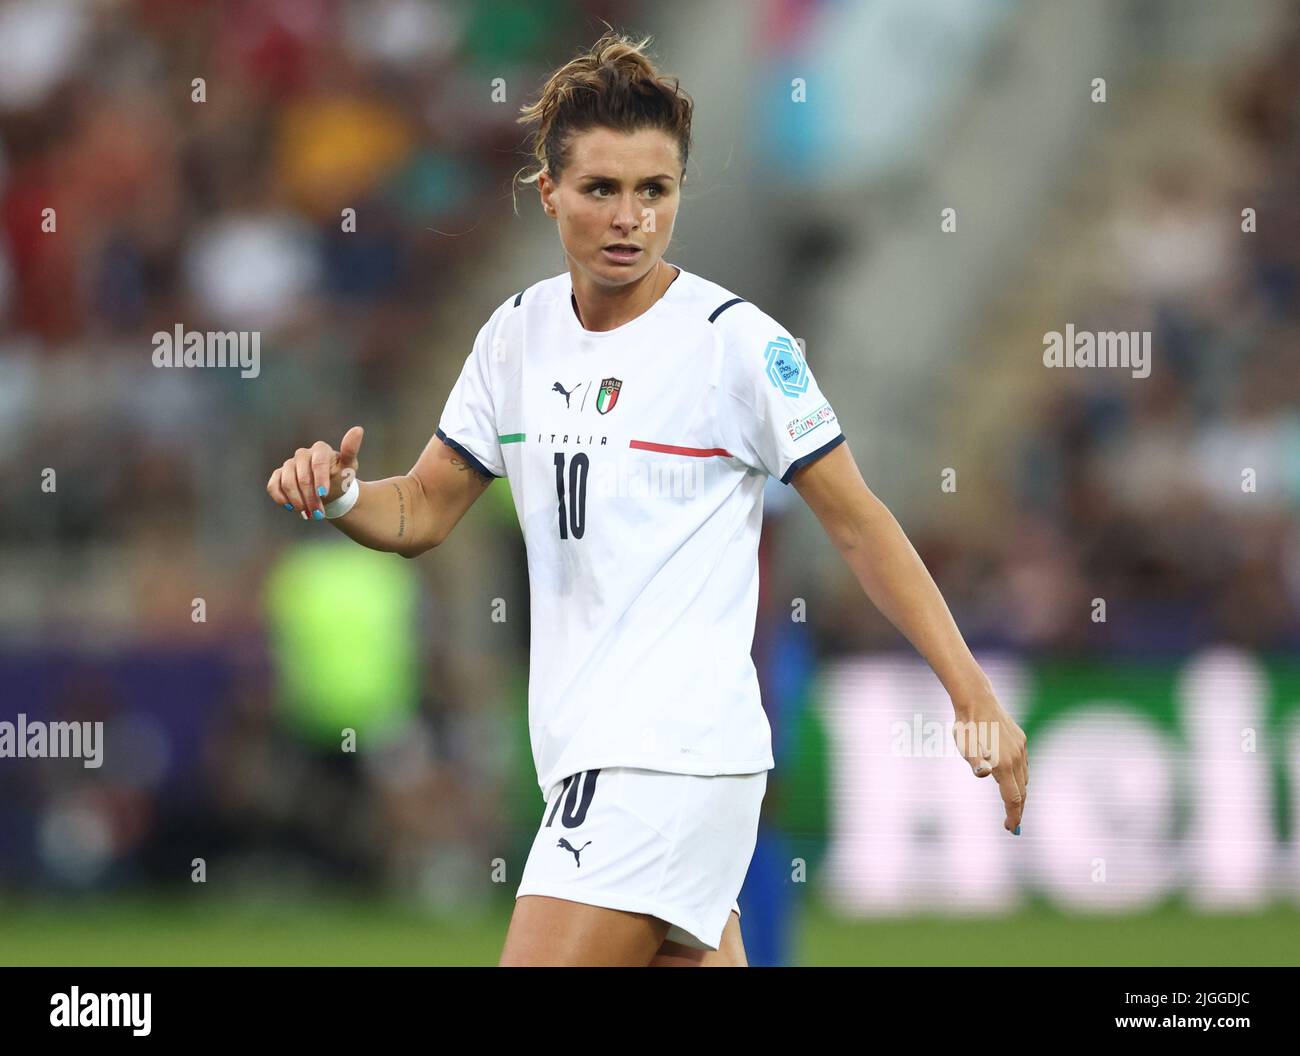 Rotherham, UK. 10th July, 2022. Cristiana Girelli of Italy during the UEFA Women's European Championship 2022 match at the New York Stadium, Rotherham. Picture credit should read: Darren Staples/Sportimage Credit: Sportimage/Alamy Live News Stock Photo